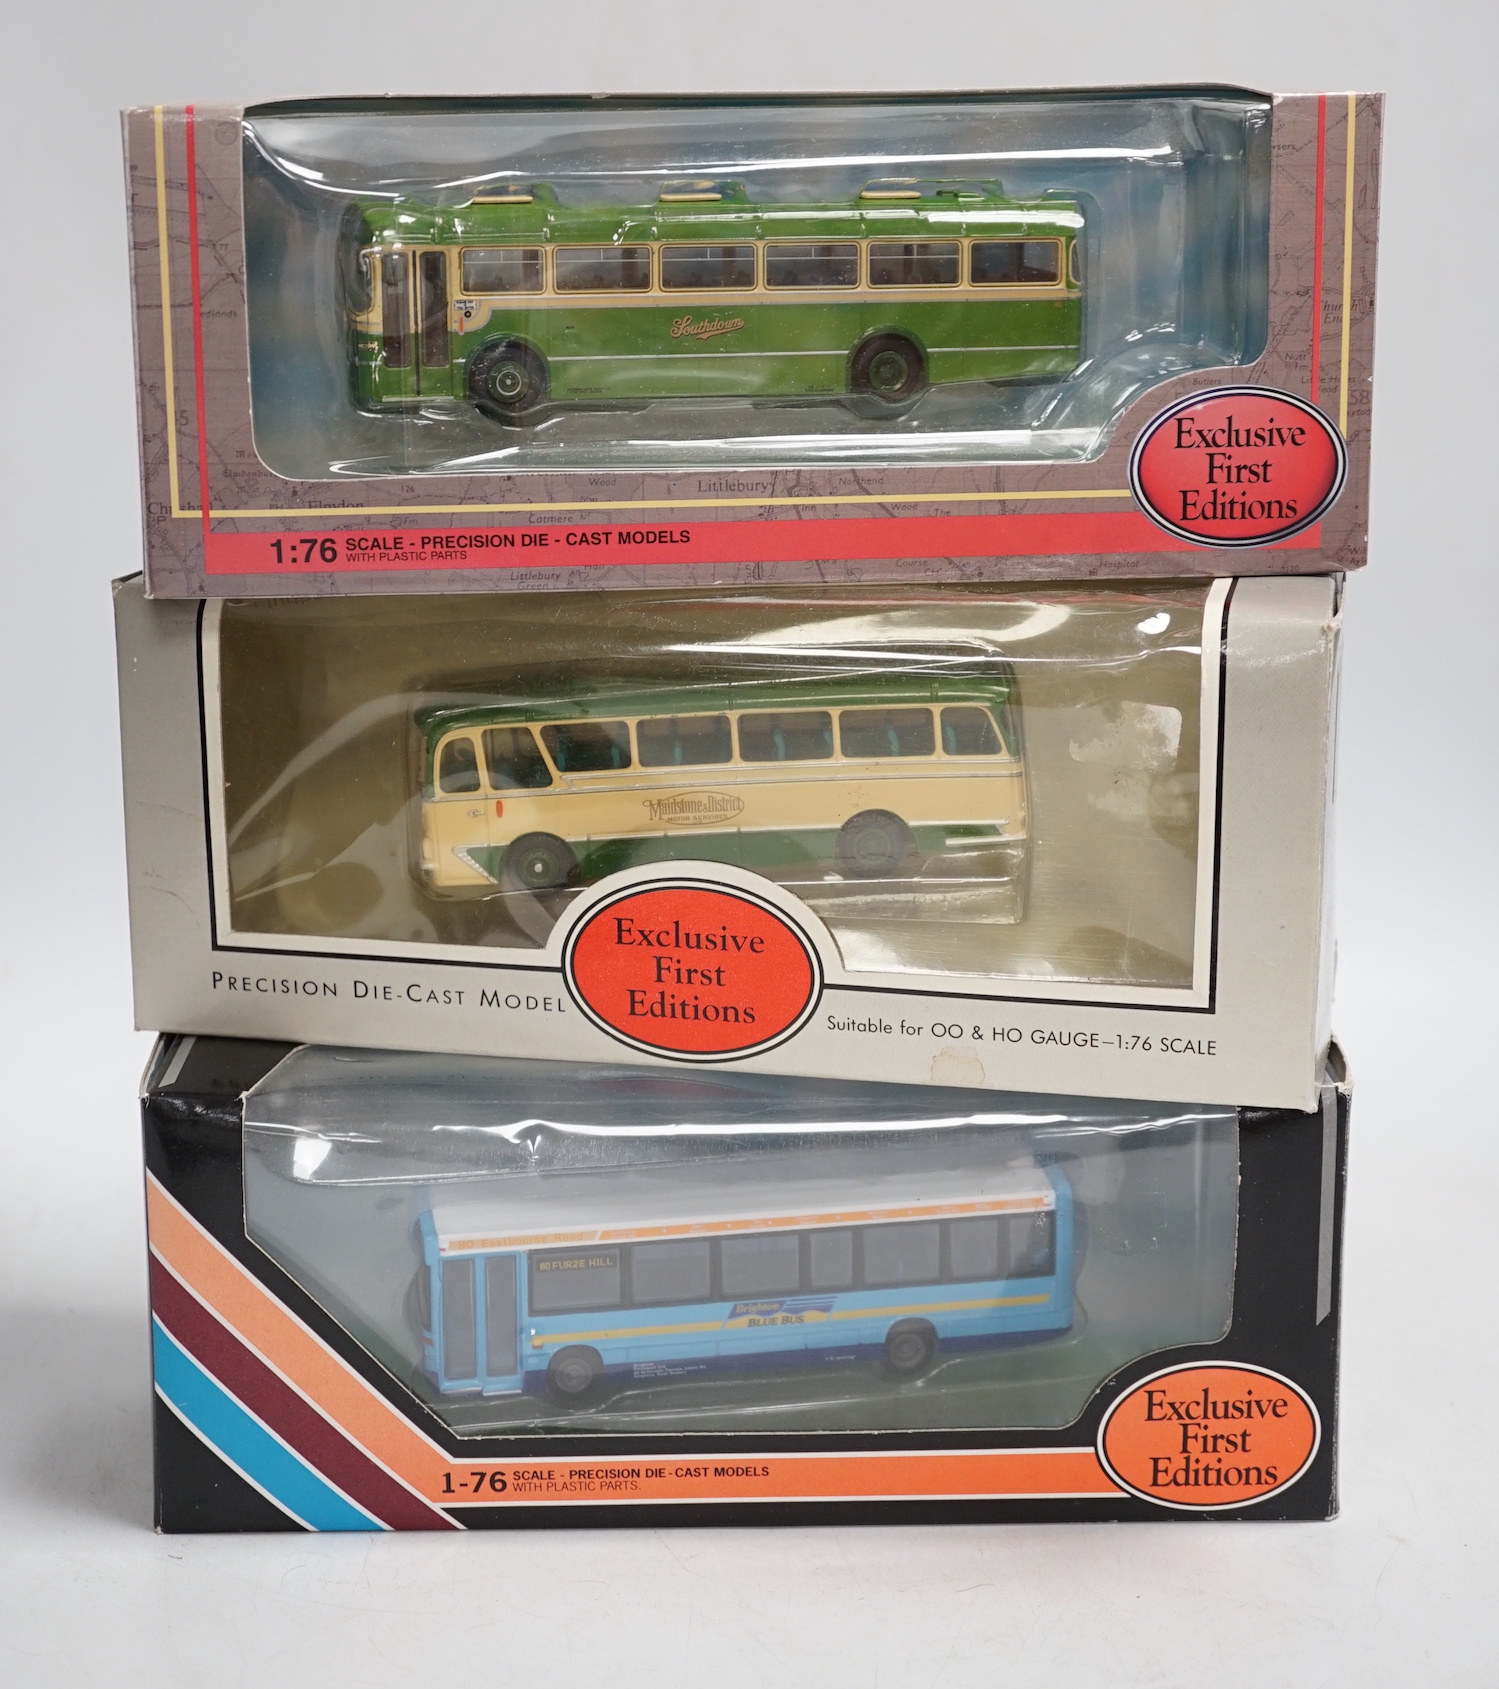 Twenty boxed EFE buses and coaches, operators include; London Transport, Southdown, Maidstone & District, Brighton & Hove, etc.